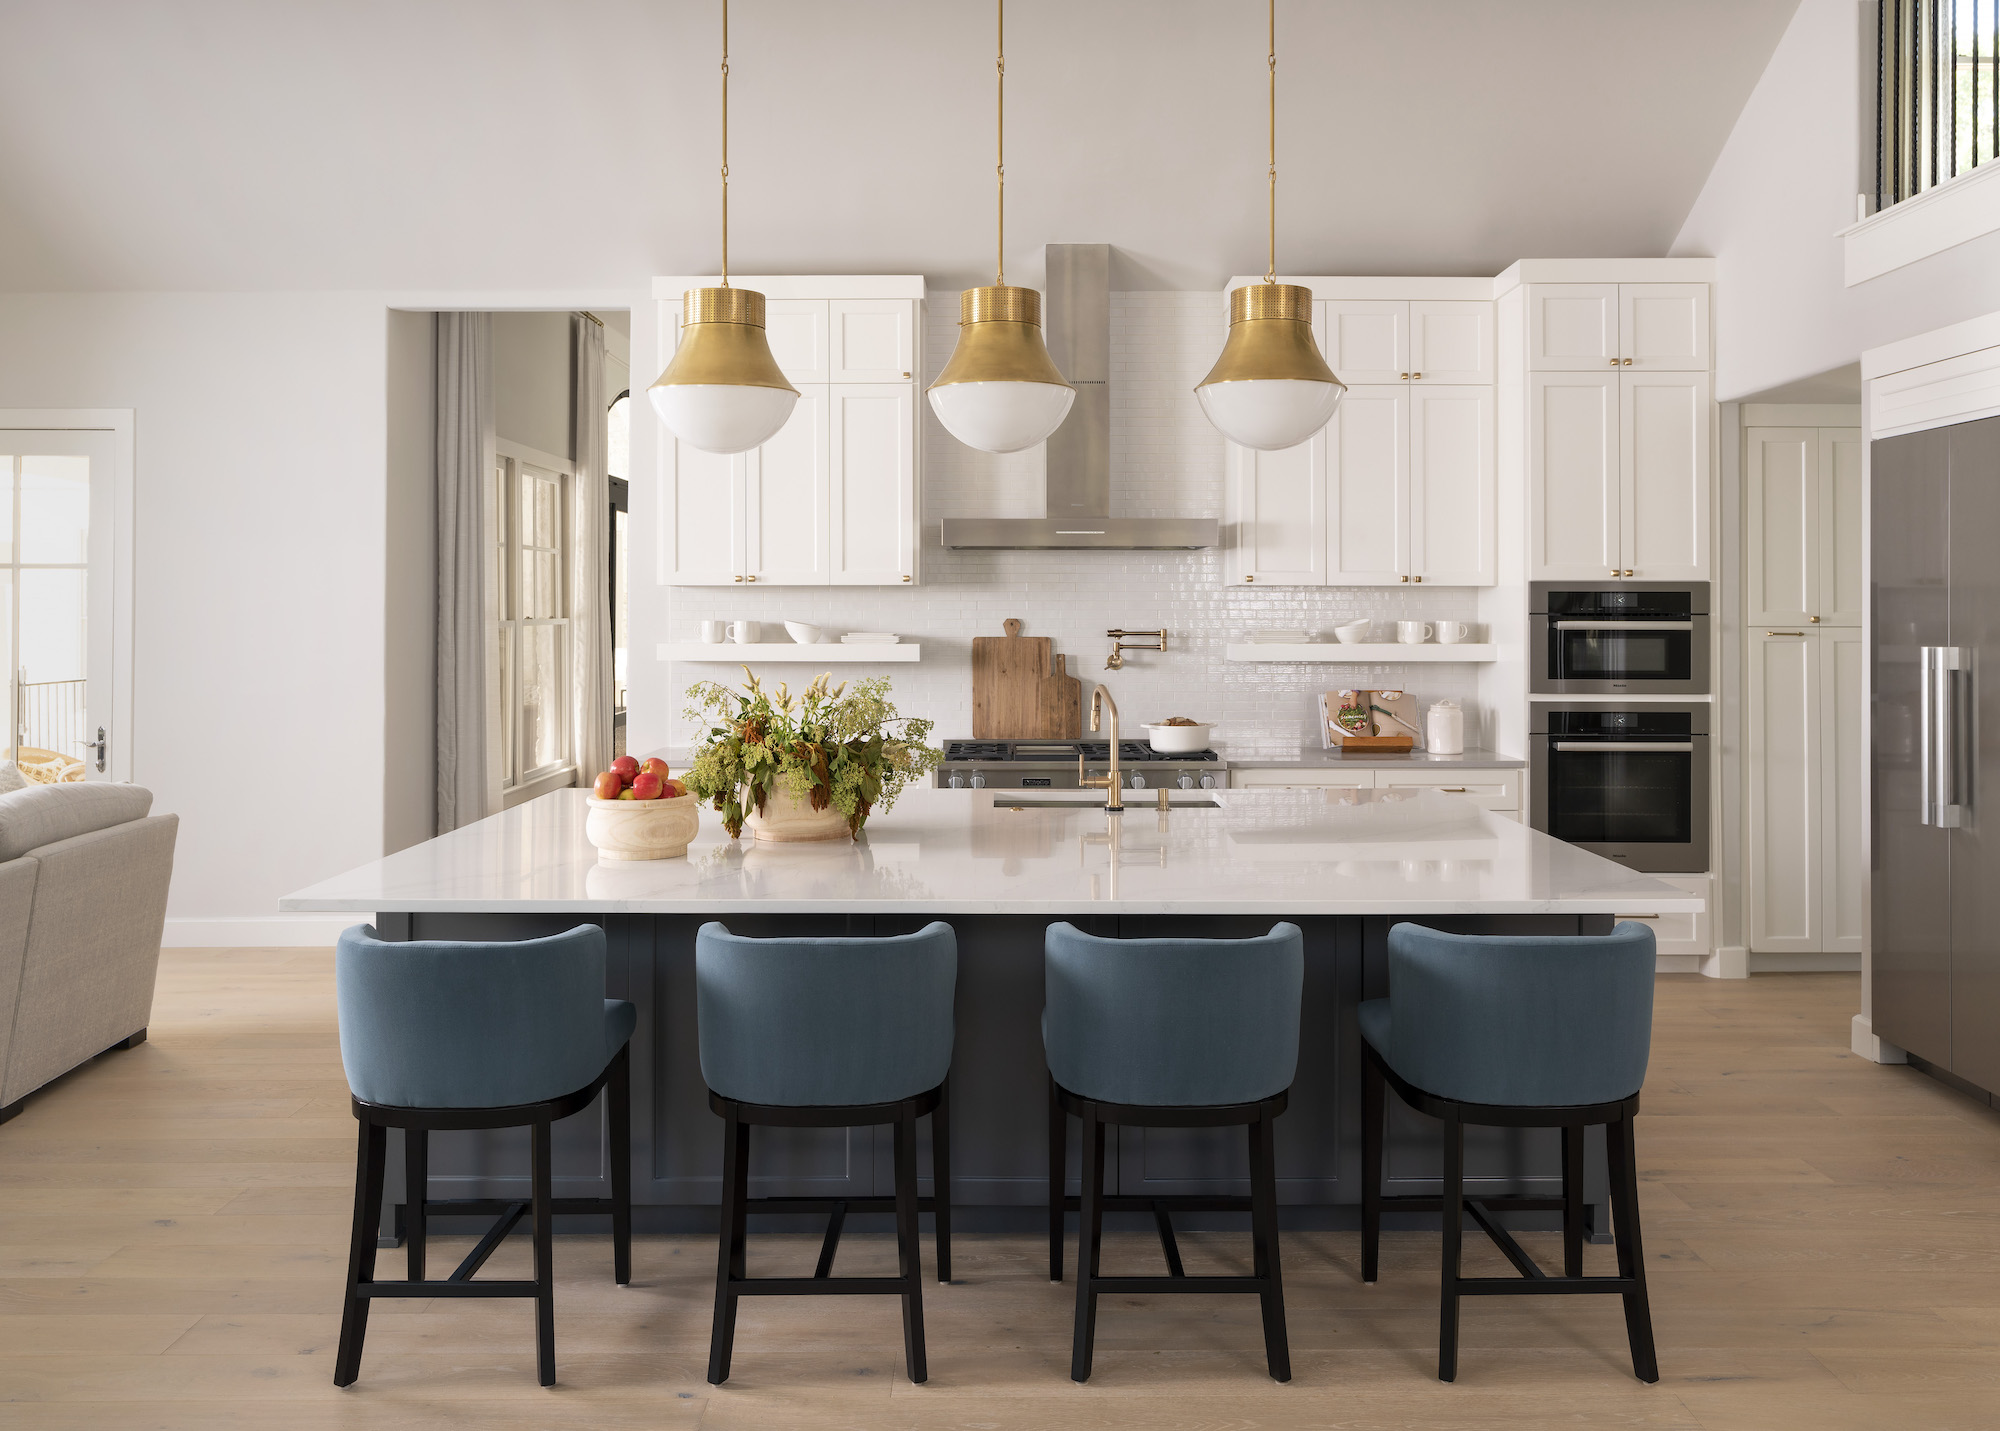 white kitchen with teal bar stools an pendant lights